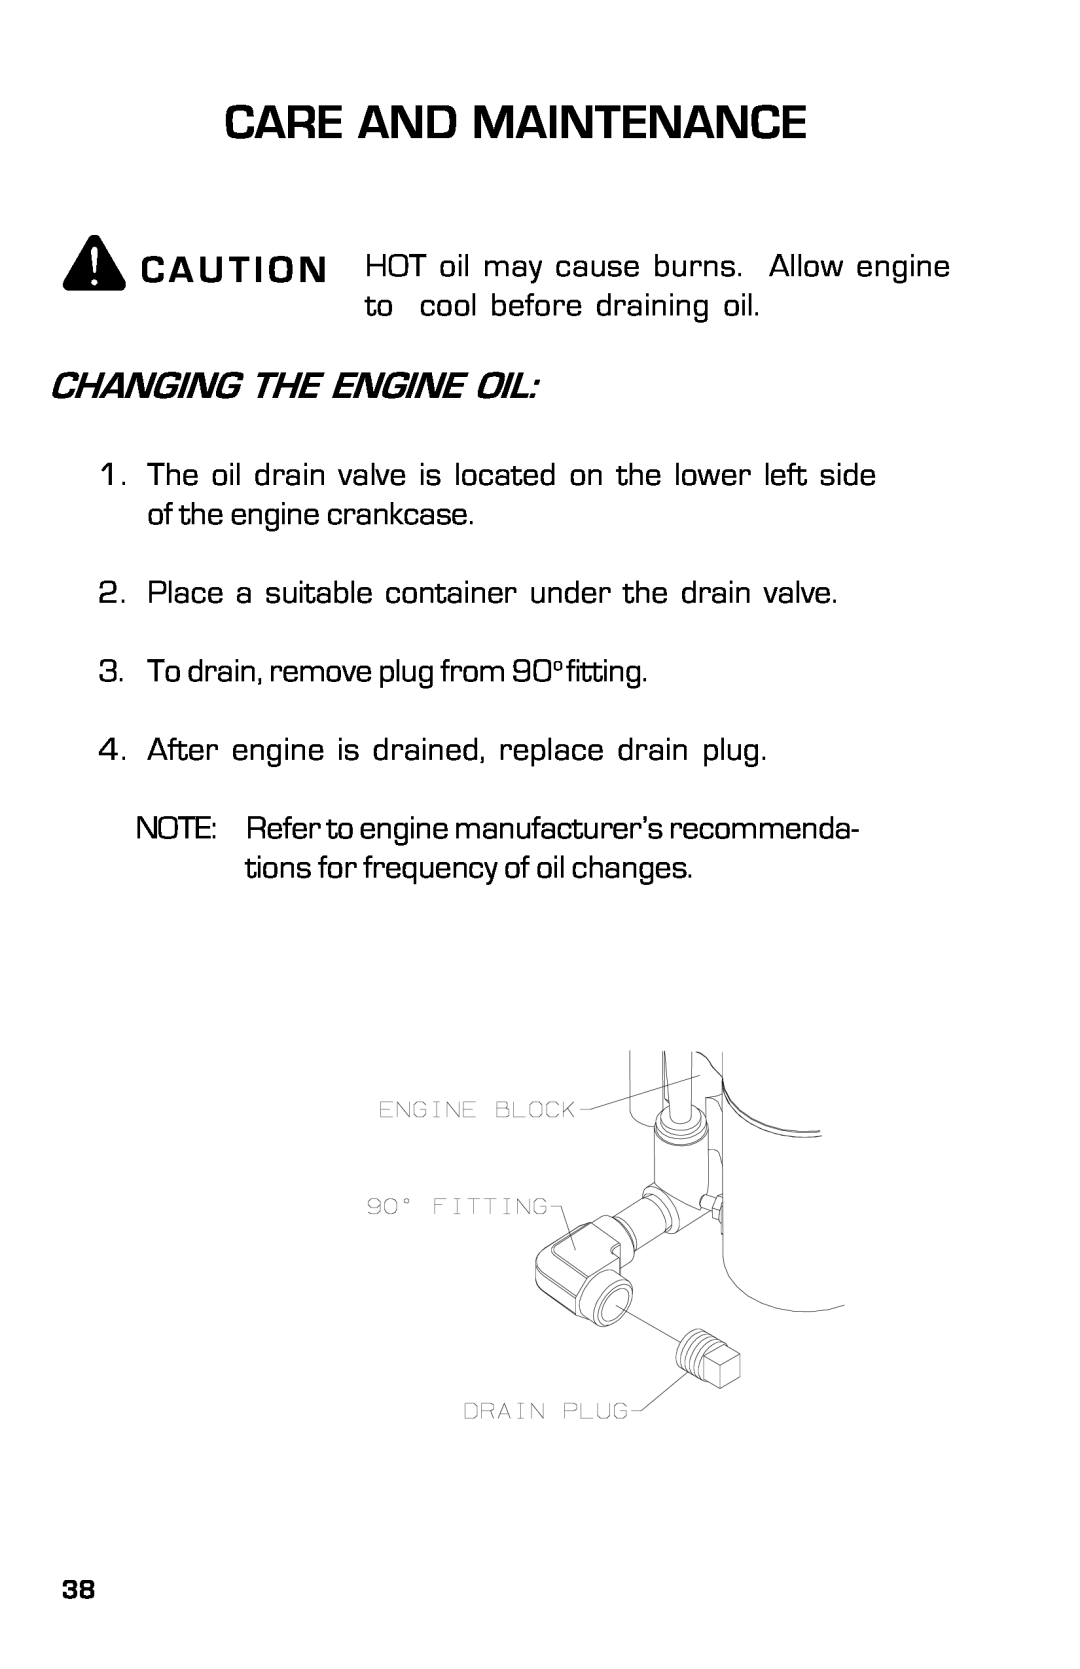 Dixon 2004 manual Changing The Engine Oil, Care And Maintenance 